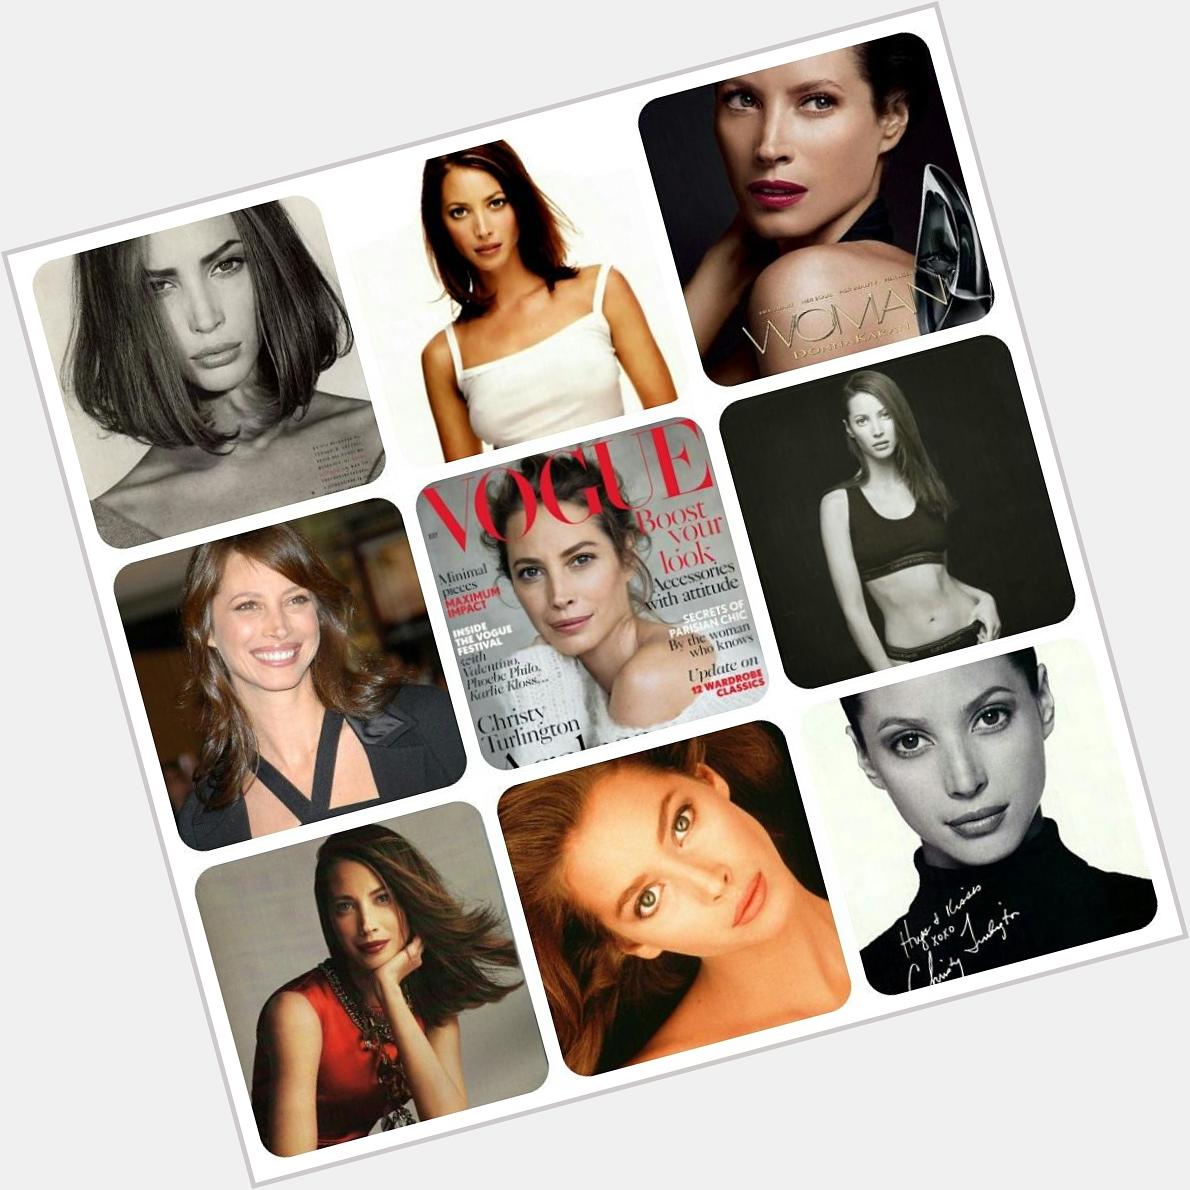 Happy birthday to one of the beauty timeless, graceful, iconic and memorable women, Christy Turlington...  